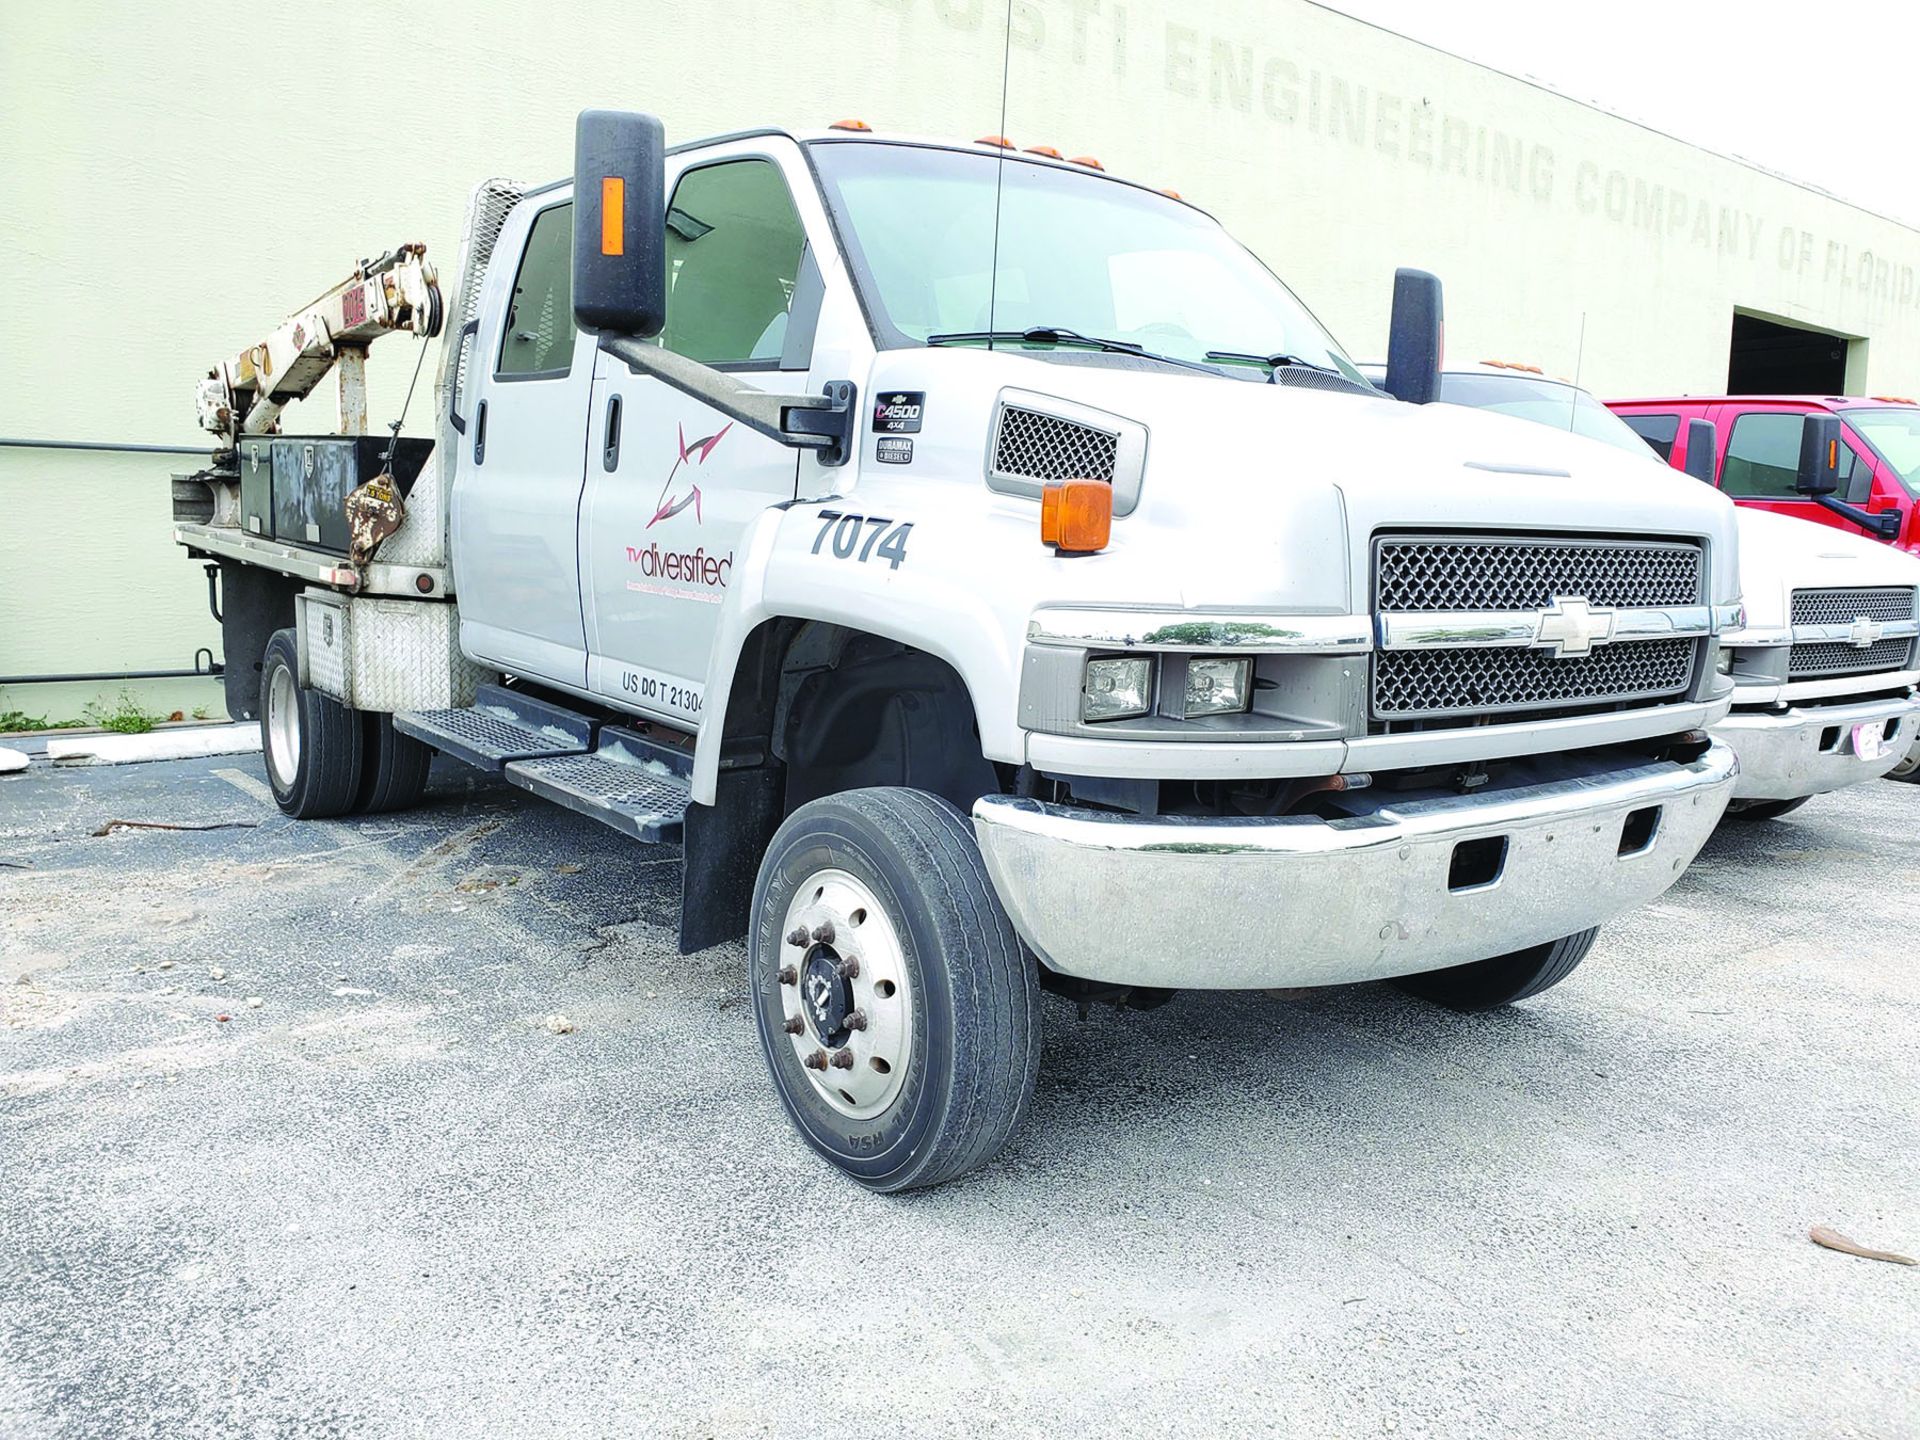 2006 CHEVROLET C4500 4X4 CREW CAB FLAT/STAKE BED TRUCK W/IMT 2015 TELESCOPING BOOM, 2.5 TON HOOK, - Image 13 of 19